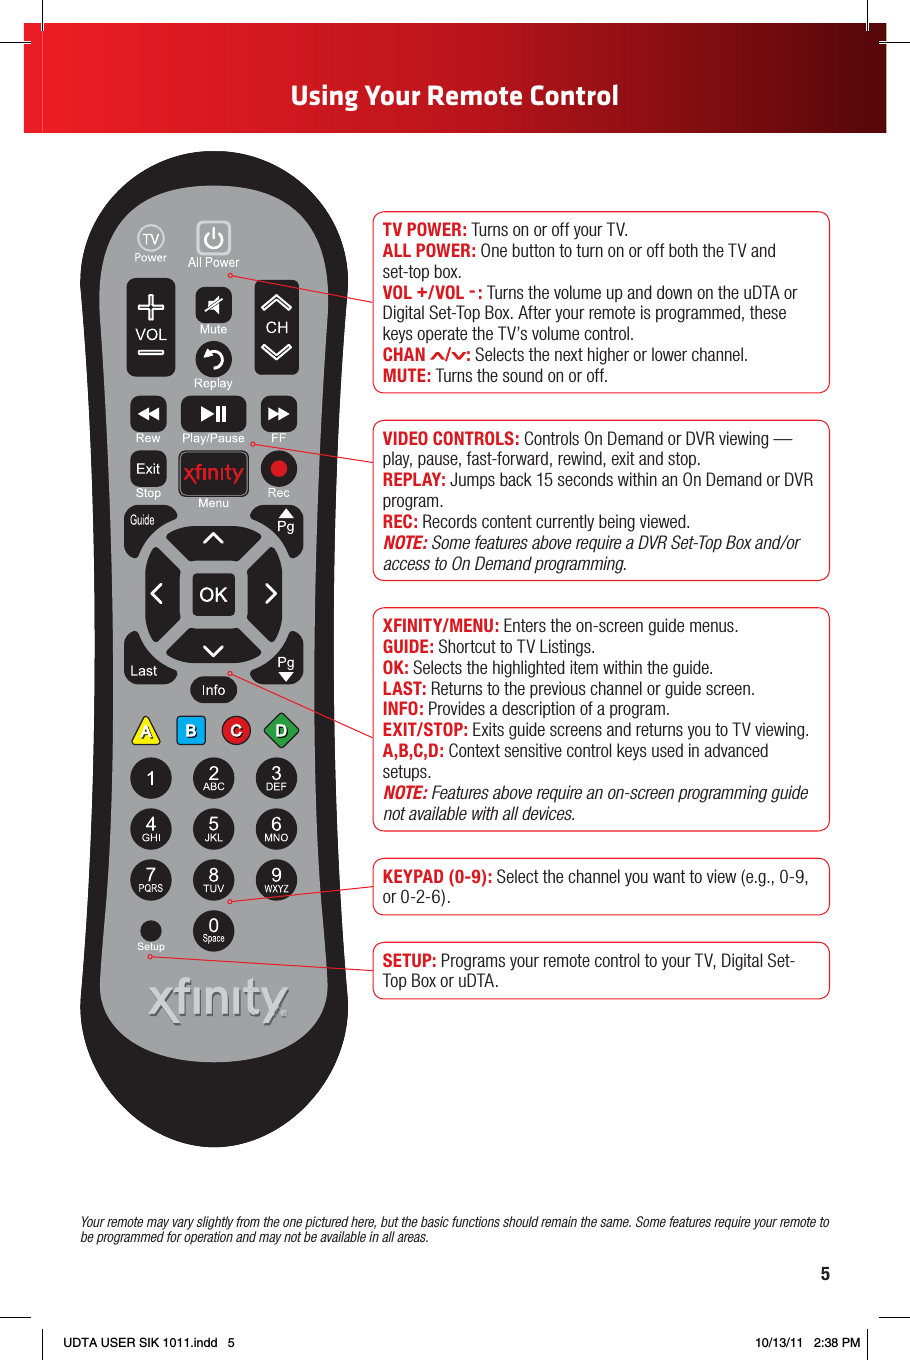 5Using Your Remote ControlYour remote may vary slightly from the one pictured here, but the basic functions should remain the same. Some features require your remote to be programmed for operation and may not be available in all areas.  TV POWER: Turns on or off your TV.ALL POWER: One button to turn on or off both the TV and set‑top box.VOL +/VOL - : Turns the volume up and down on the uDTA or Digital Set‑Top Box. After your remote is programmed, these keys operate the TV’s volume control.CHAN  / : Selects the next higher or lower channel.MUTE: Turns the sound on or off. VIDEO CONTROLS: Controls On Demand or DVR viewing — play, pause, fast‑forward, rewind, exit and stop.REPLAY: Jumps back 15 seconds within an On Demand or DVR program.REC: Records content currently being viewed.NOTE: Some features above require a DVR Set-Top Box and/or access to On Demand programming.XFINITY/MENU: Enters the on‑screen guide menus.GUIDE: Shortcut to TV Listings.OK: Selects the highlighted item within the guide.LAST: Returns to the previous channel or guide screen.INFO: Provides a description of a program.EXIT/STOP: Exits guide screens and returns you to TV viewing.A,B,C,D: Context sensitive control keys used in advanced setups.NOTE: Features above require an on-screen programming guide not available with all devices.KEYPAD (0-9): Select the channel you want to view (e.g., 0‑9, or 0‑2‑6).SETUP: Programs your remote control to your TV, Digital Set‑Top Box or uDTA.UDTA USER SIK 1011.indd   5 10/13/11   2:38 PM